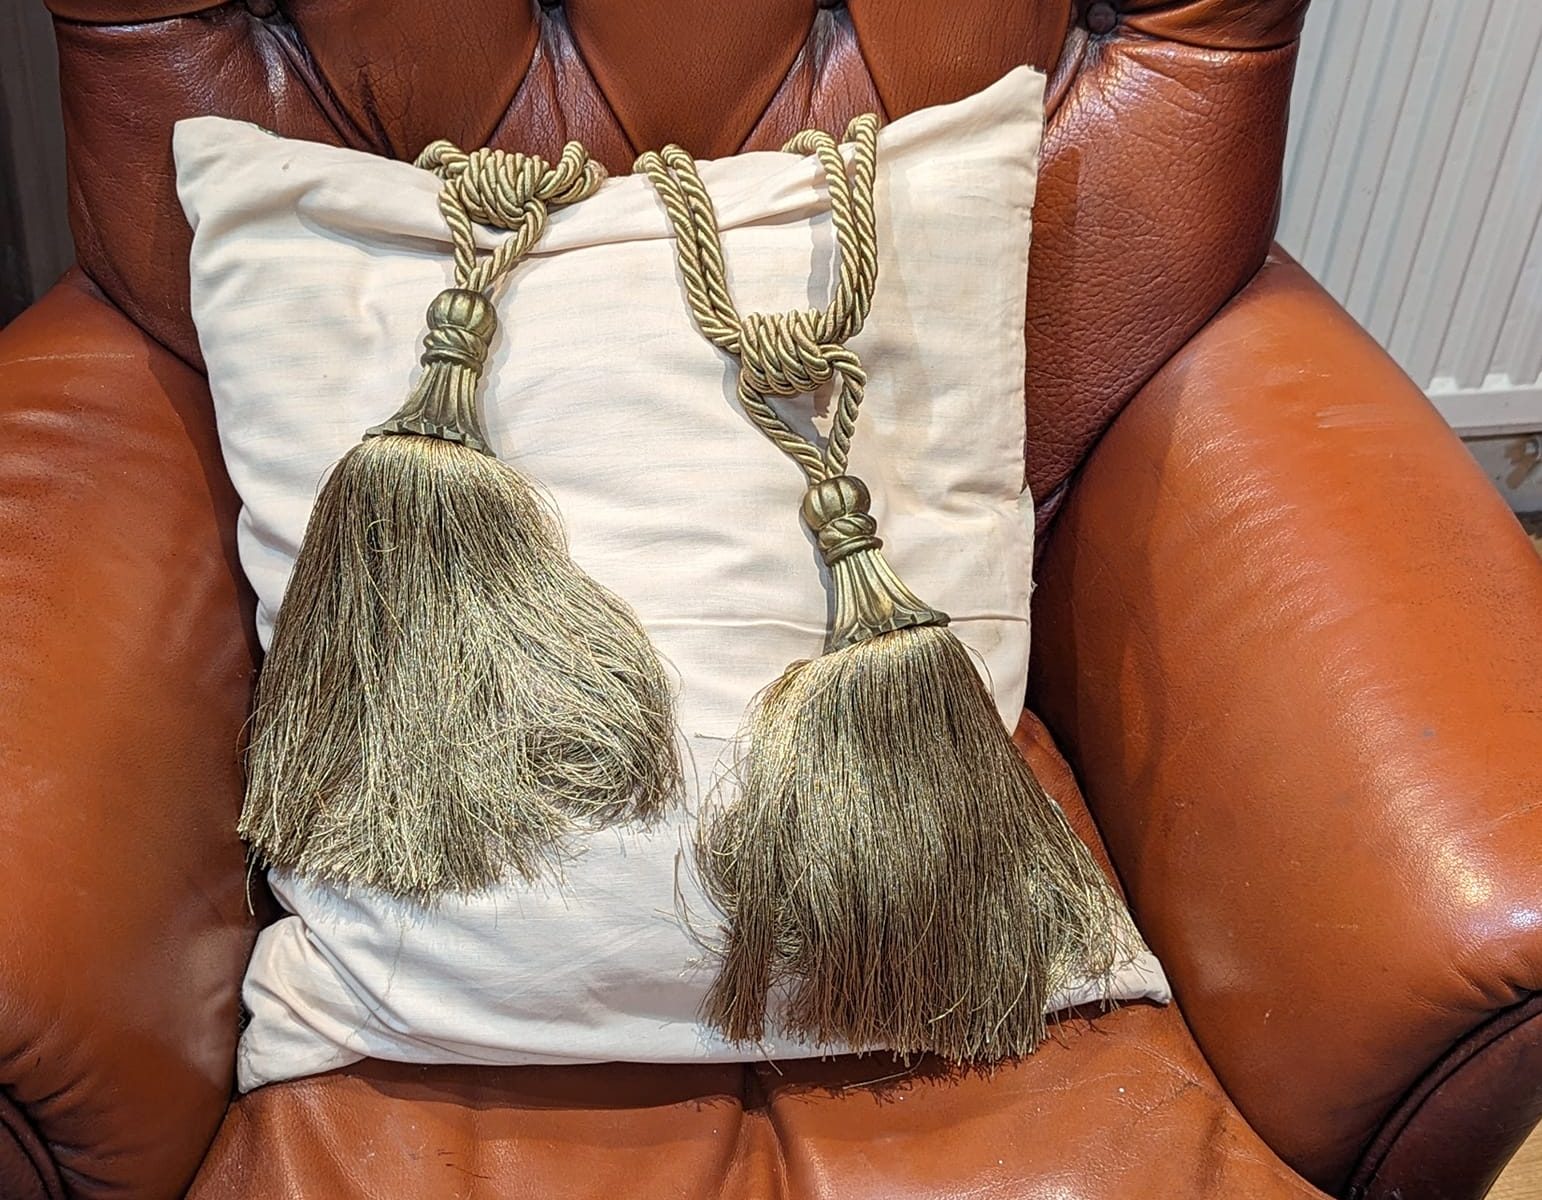 Gold Silk Rope/Tassel Tie-backs with Gold top detailing - 2 Pairs available